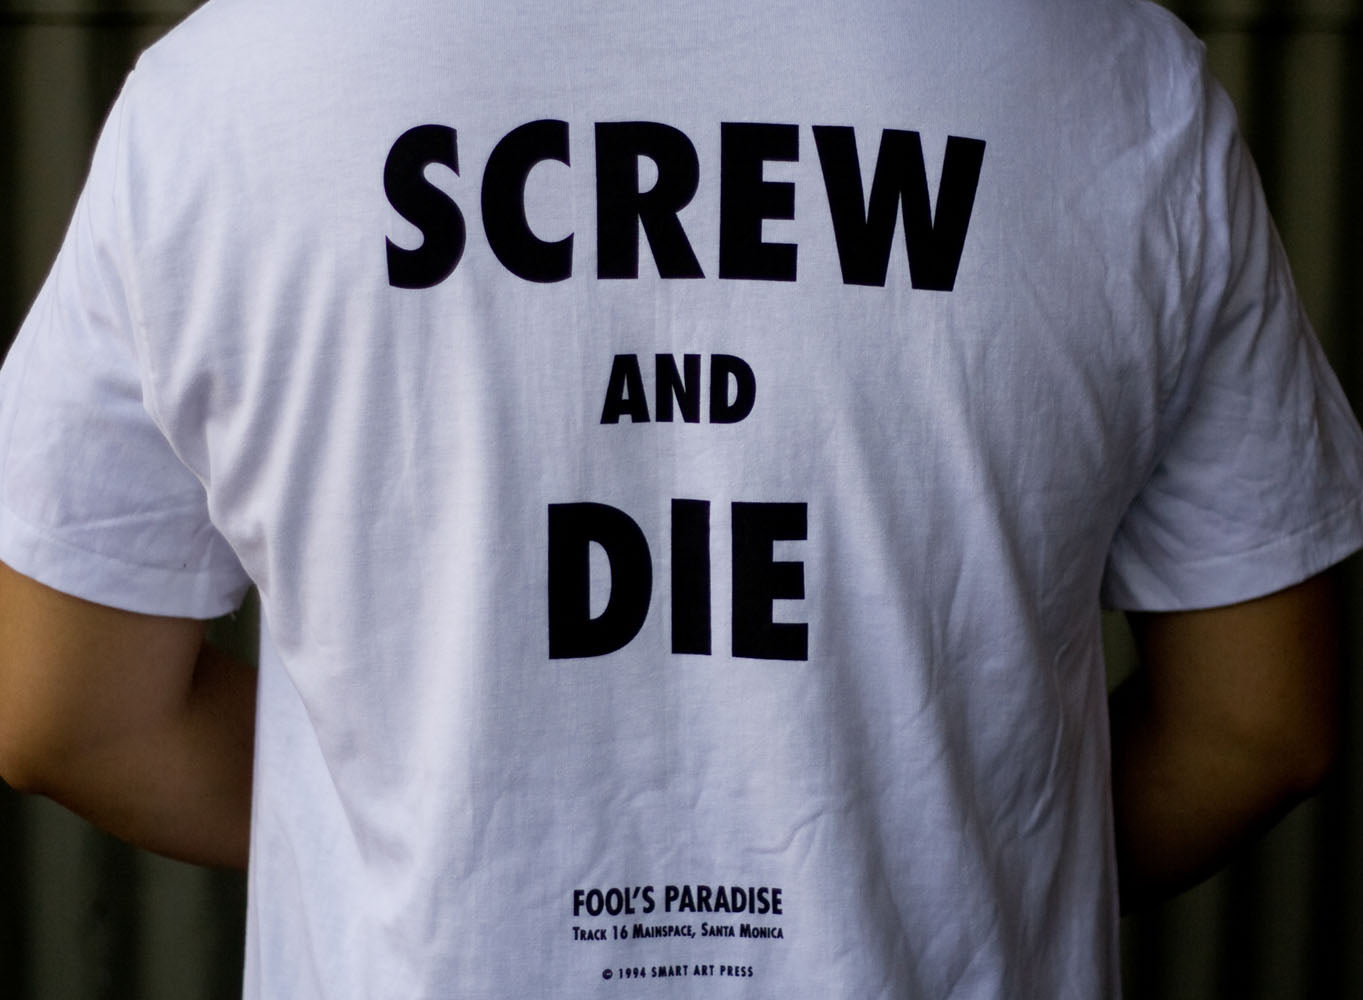 Vintage Screw and Die T-Shirt [from Fool's Paradise exhibition]